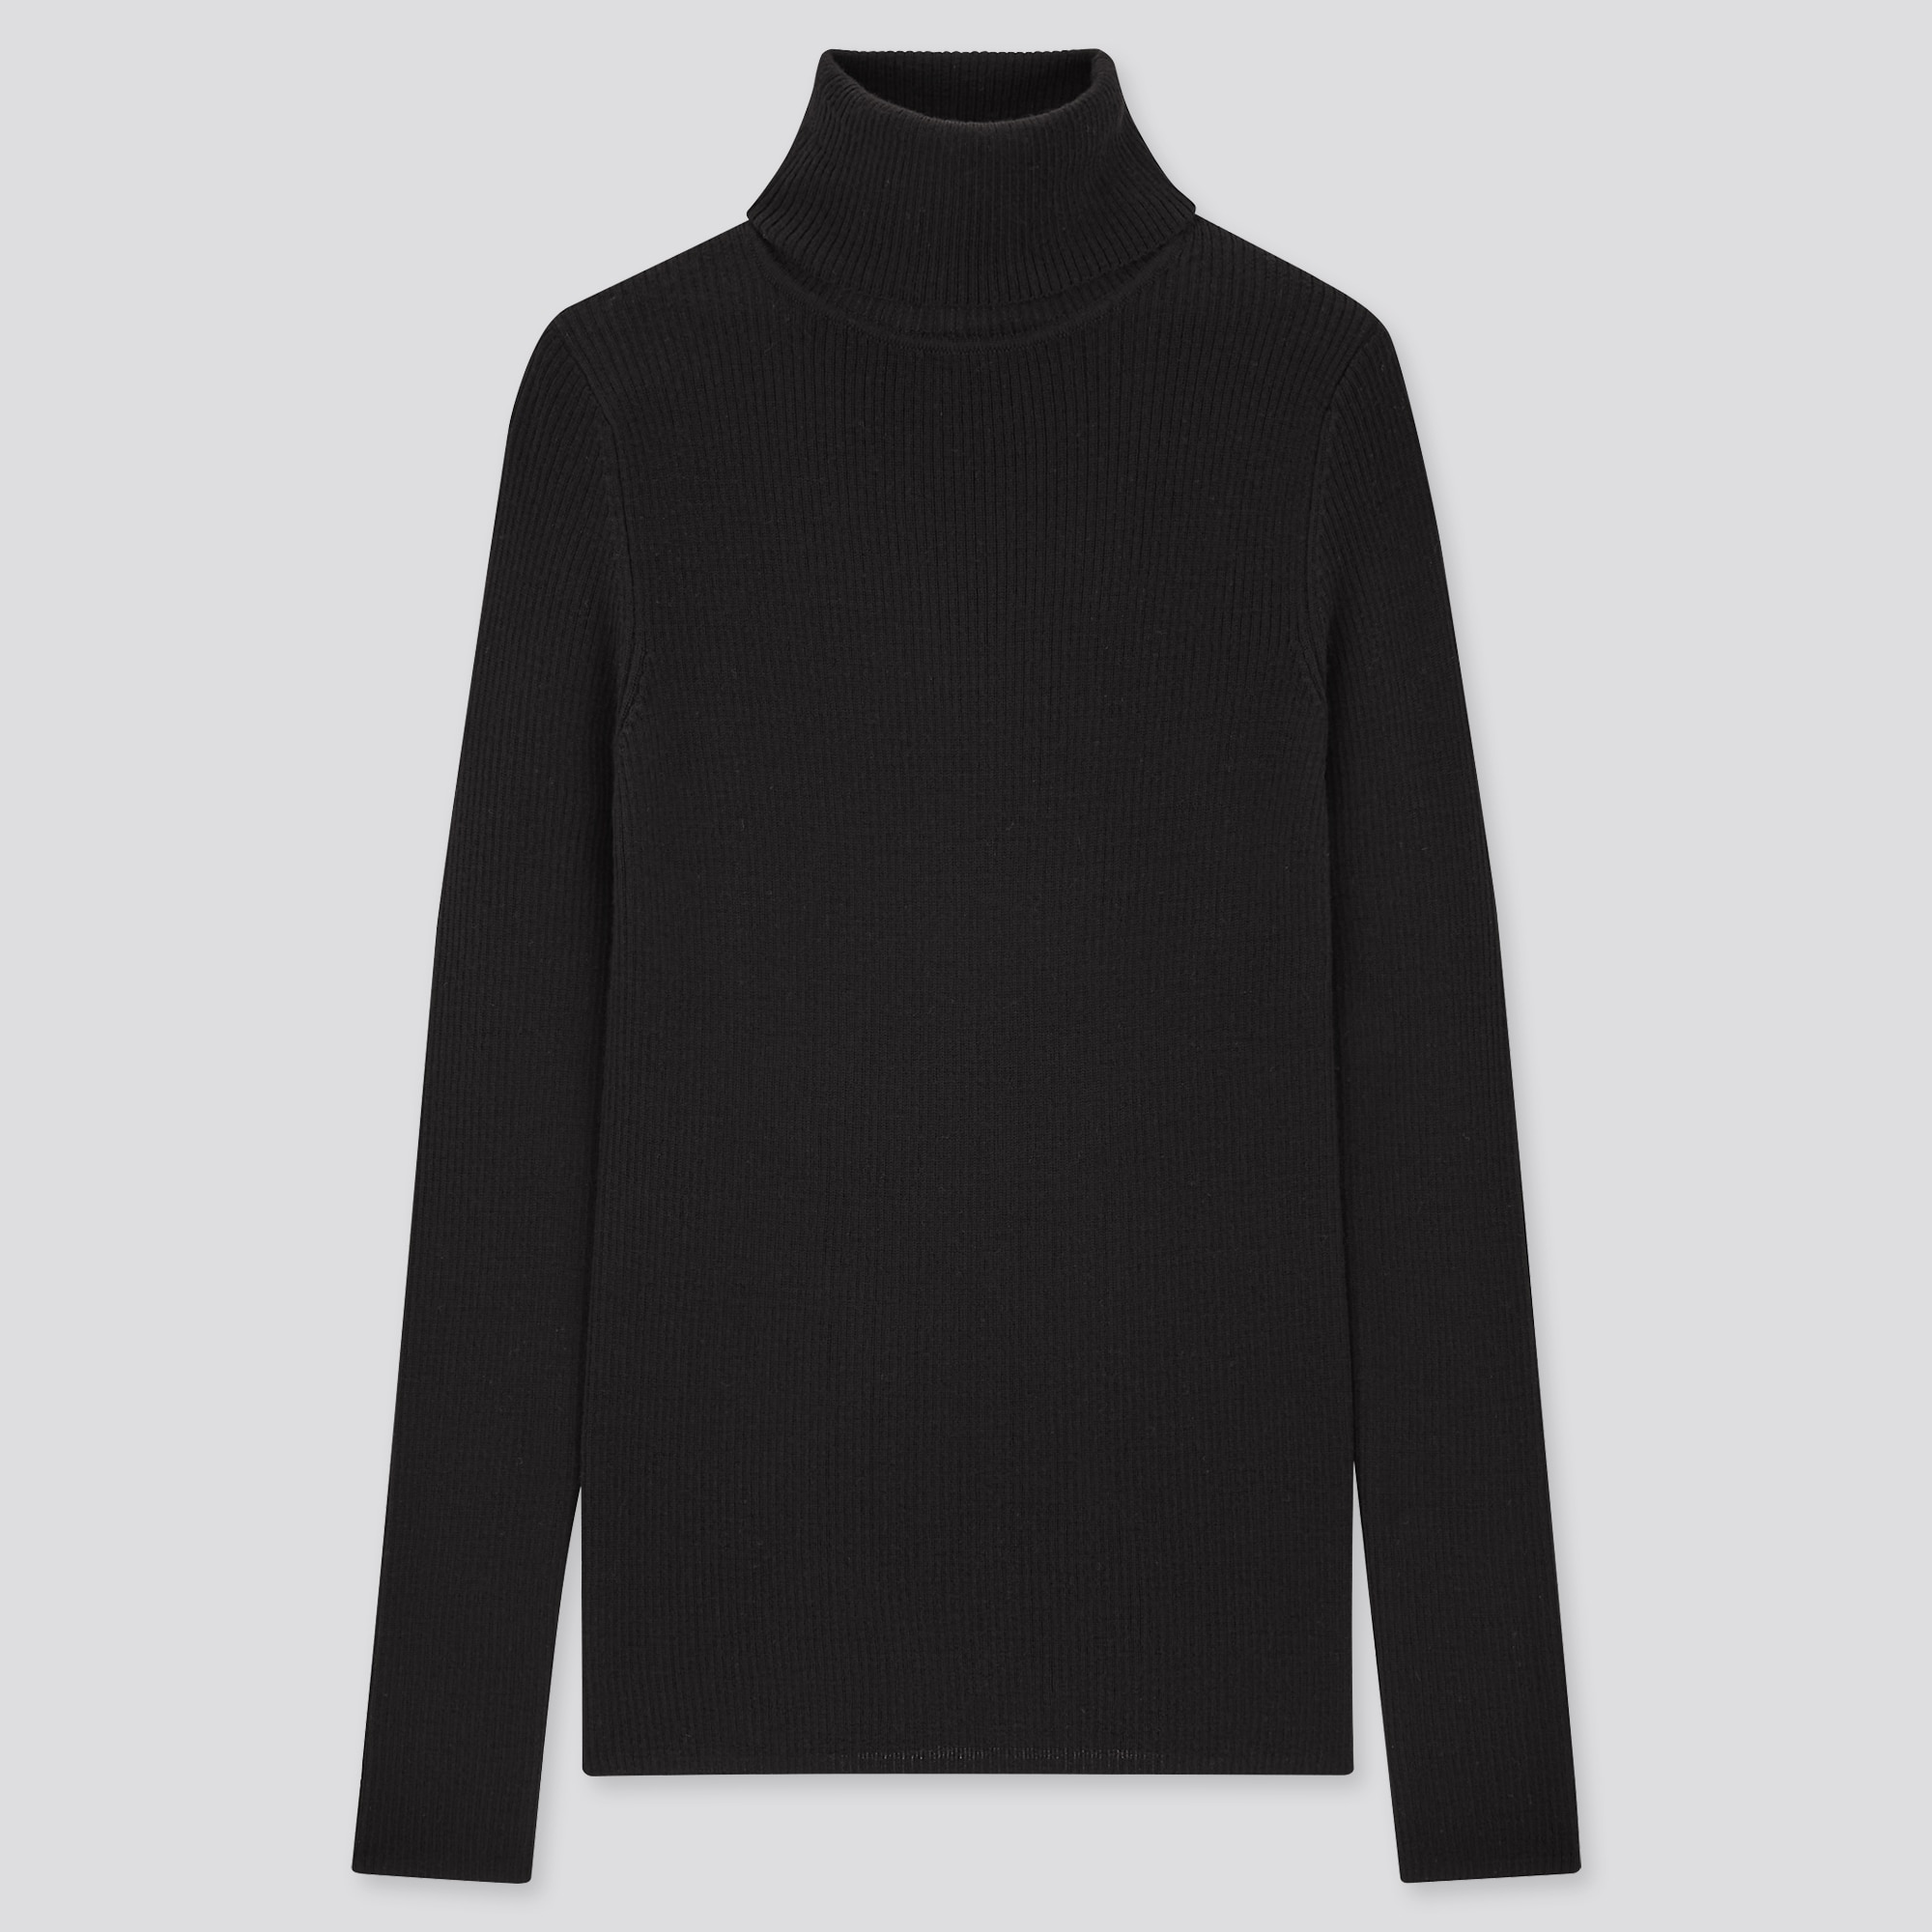 Uniqlo Fine Merino Ribbed Turtleneck Sweater  59 Cute Sweaters Youll Get  a Ton of Compliments On  POPSUGAR Fashion Photo 5